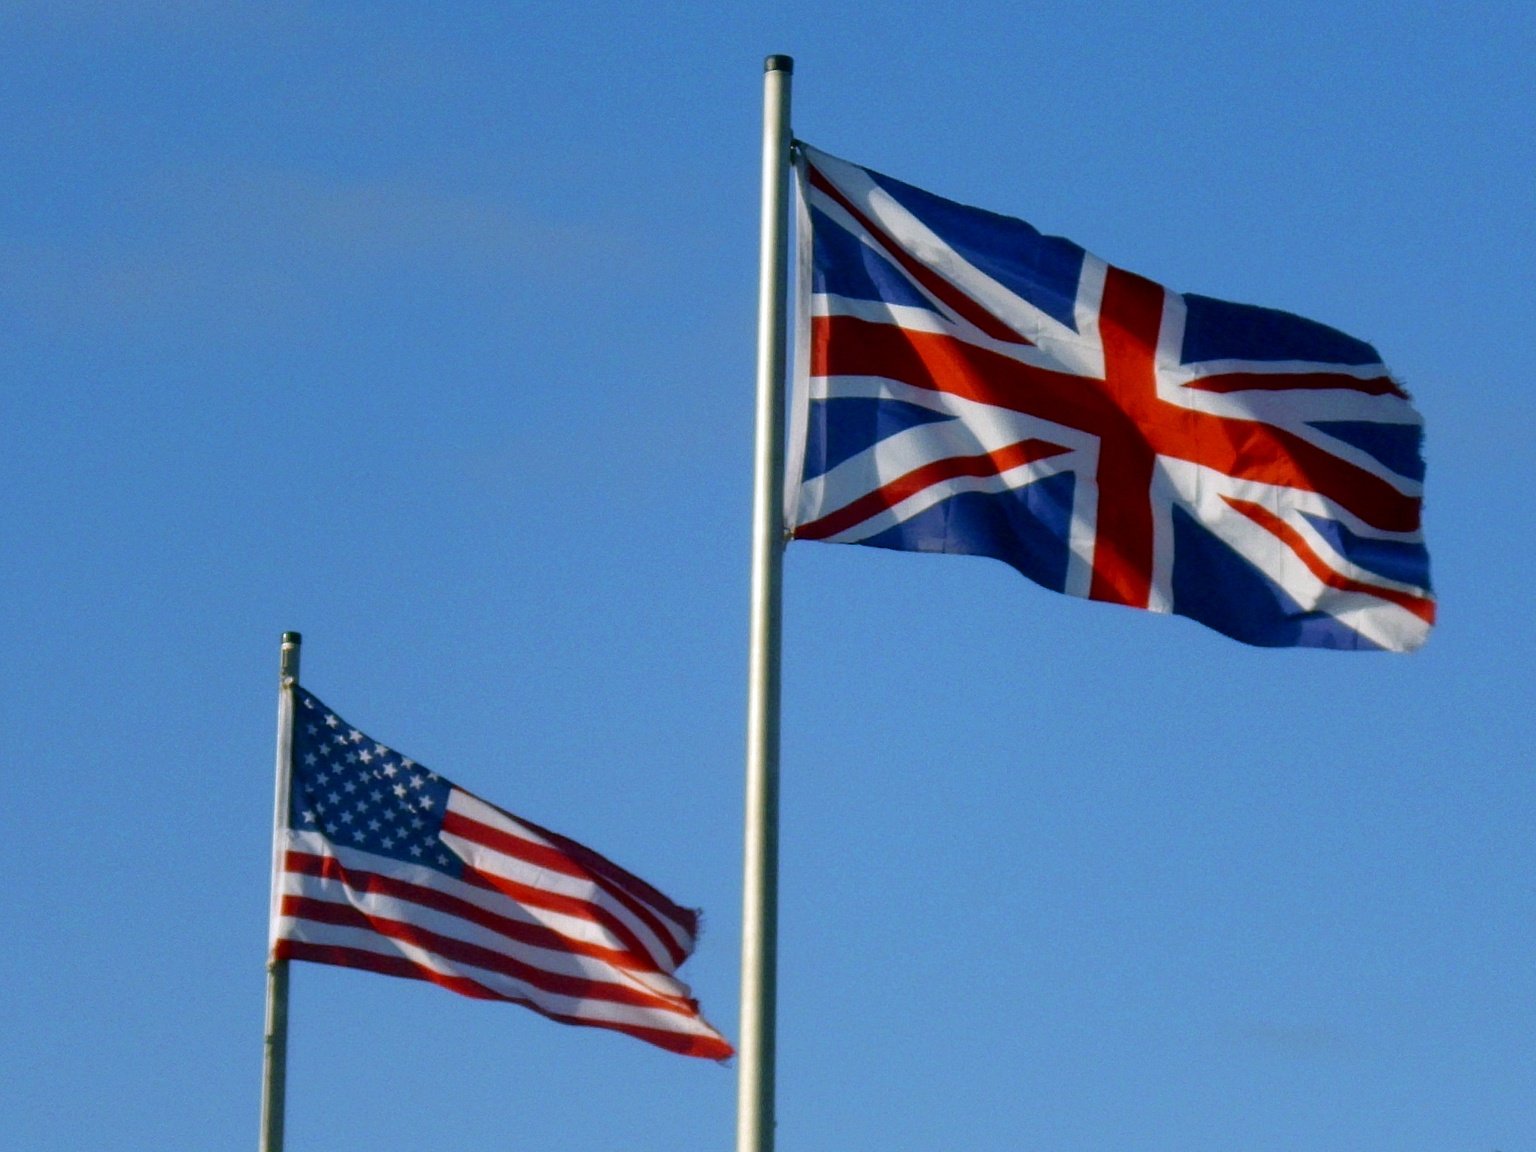 The flags of the UK and the US fly in the wind